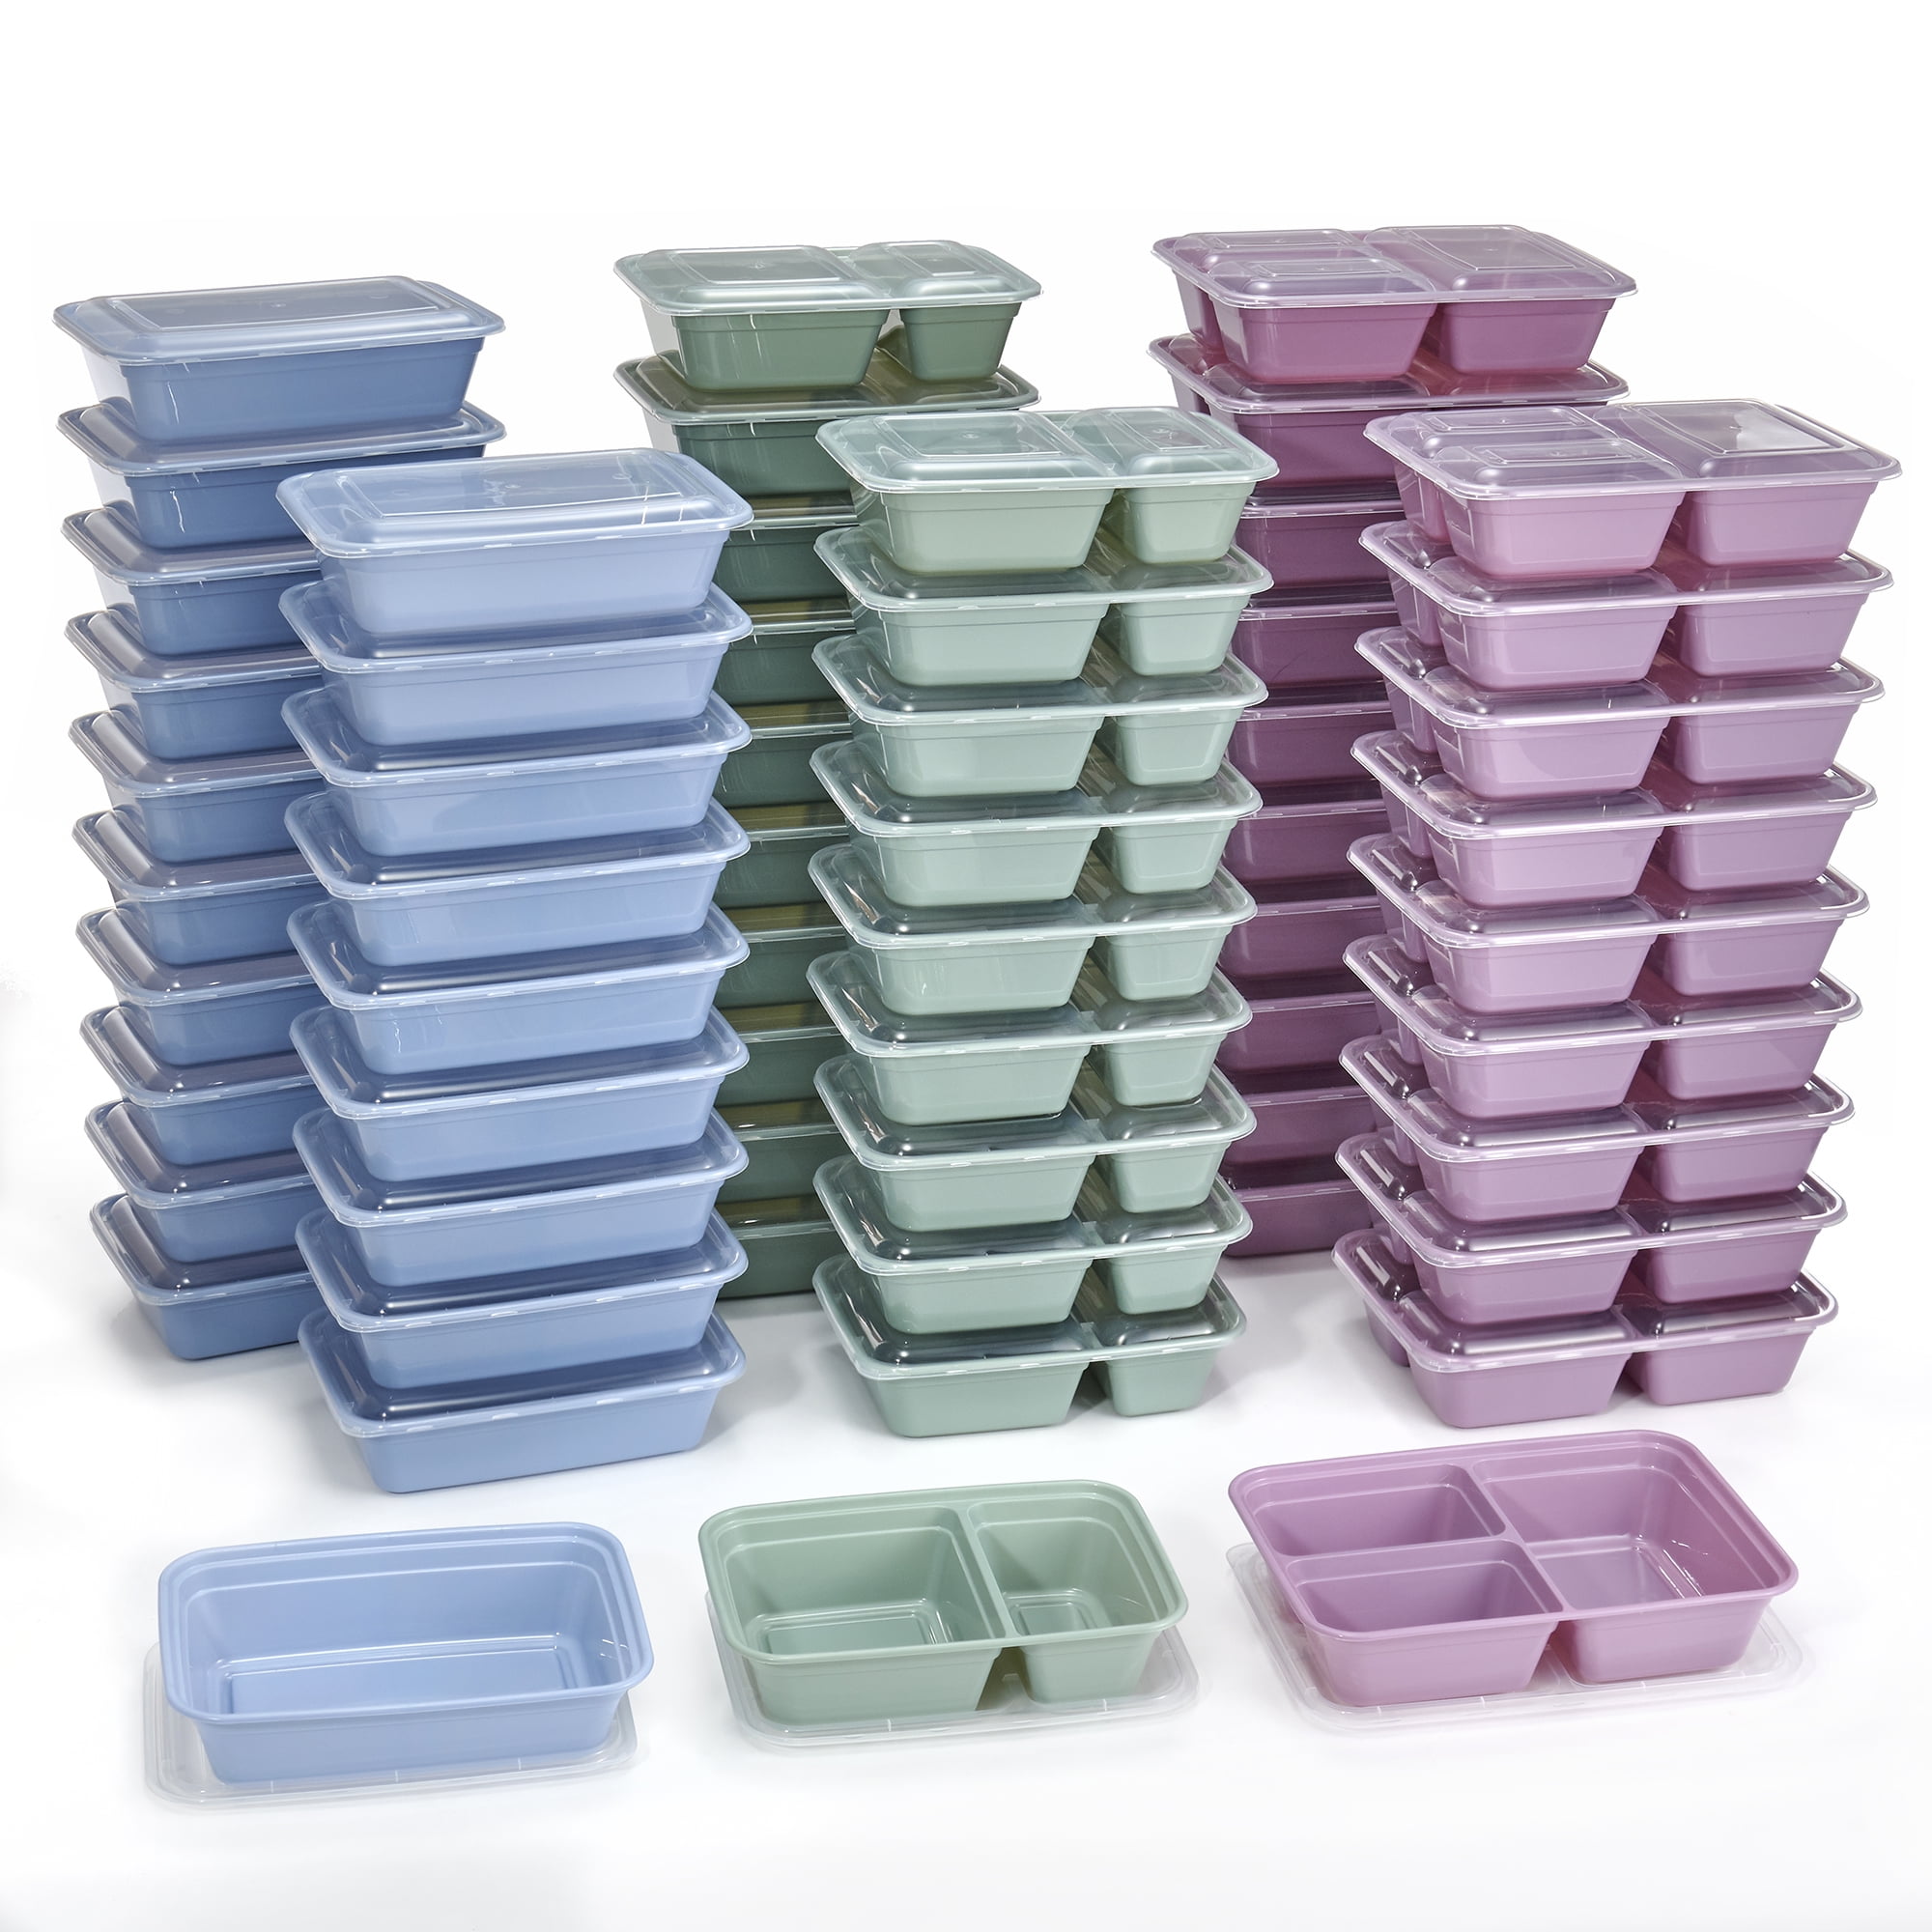 Mainstays 70 Piece Food Storage Containers Meal Prep Set